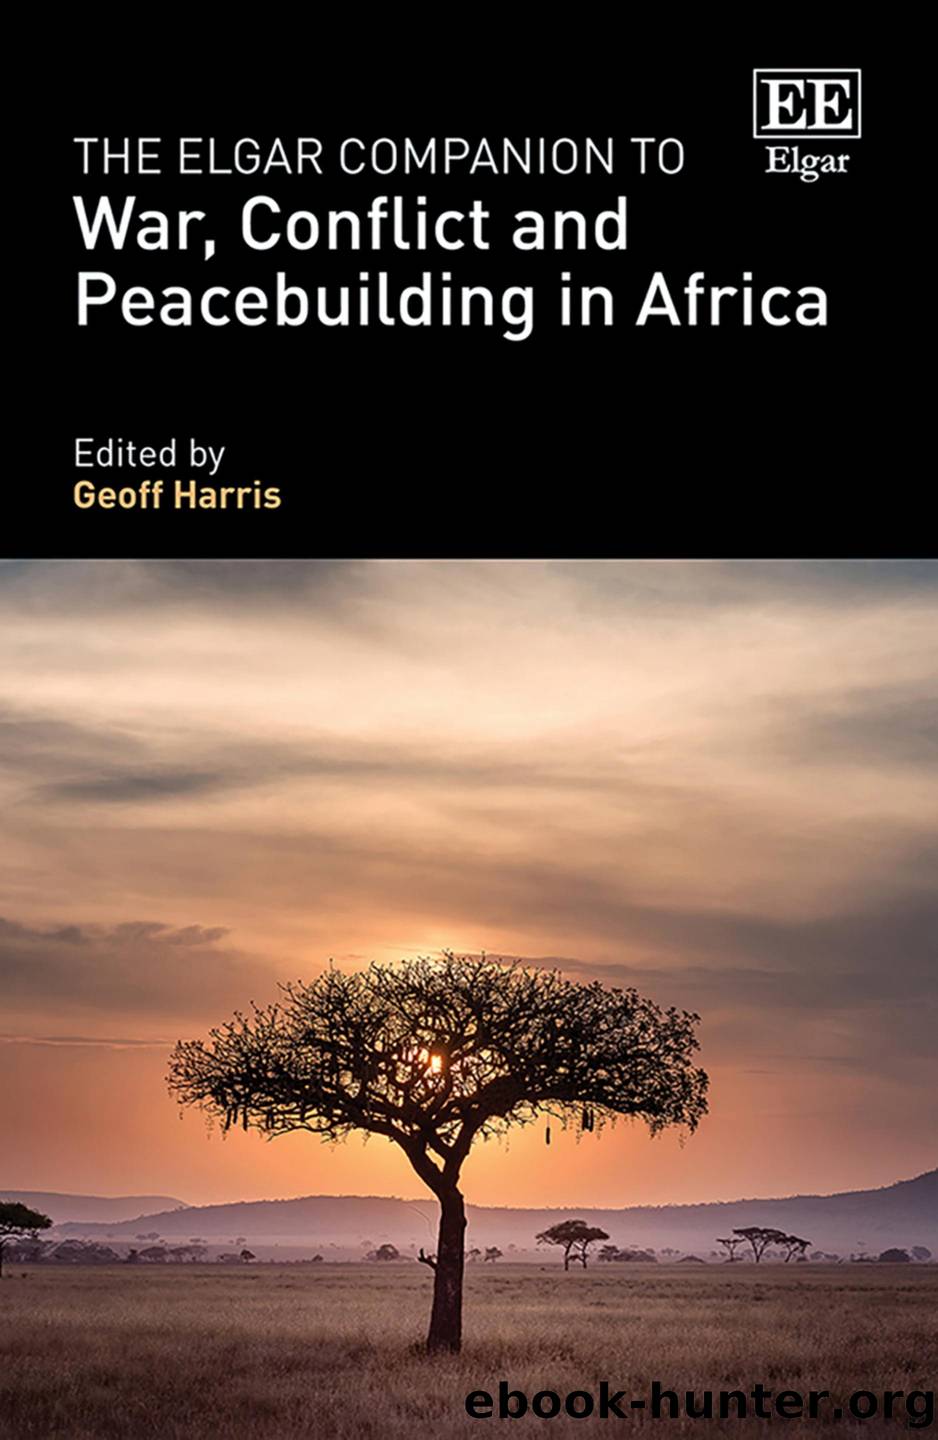 The Elgar Companion to War, Conflict and Peacebuilding in Africa by Geoff Harris;